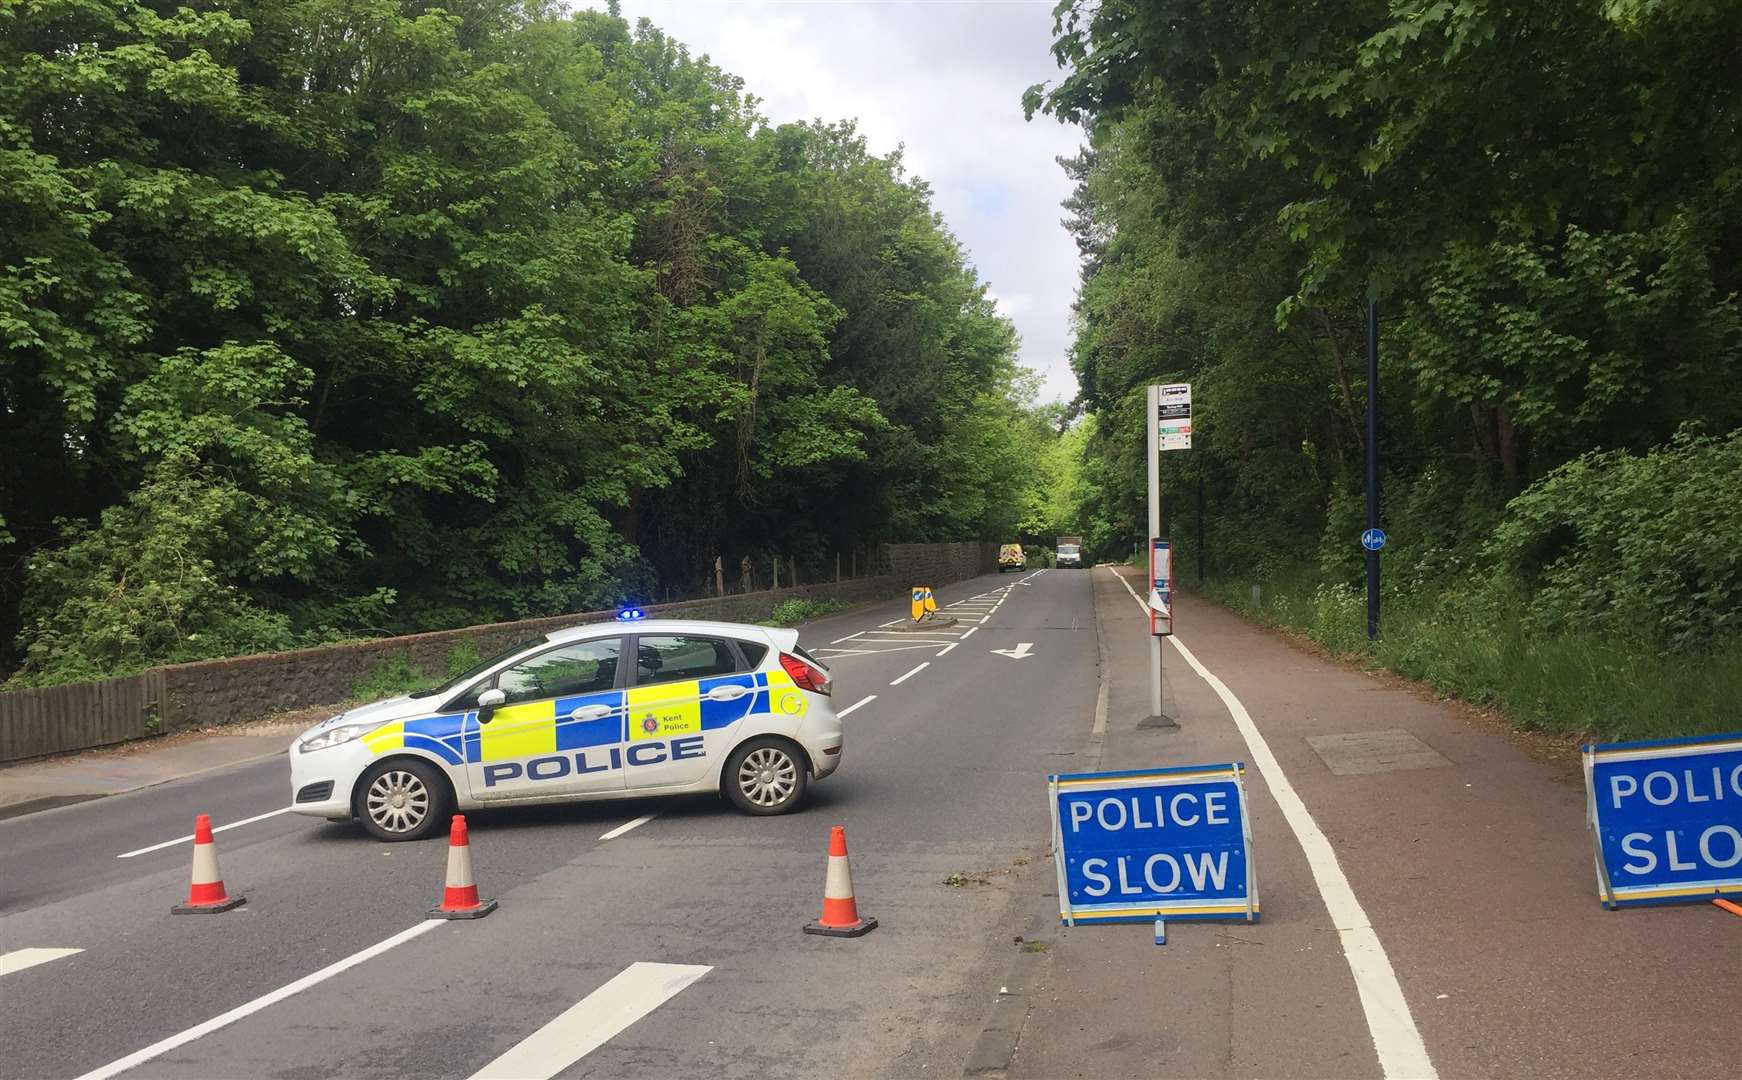 Police closed off the A20 in Maidstone following an accident in which a car crashed into a tree